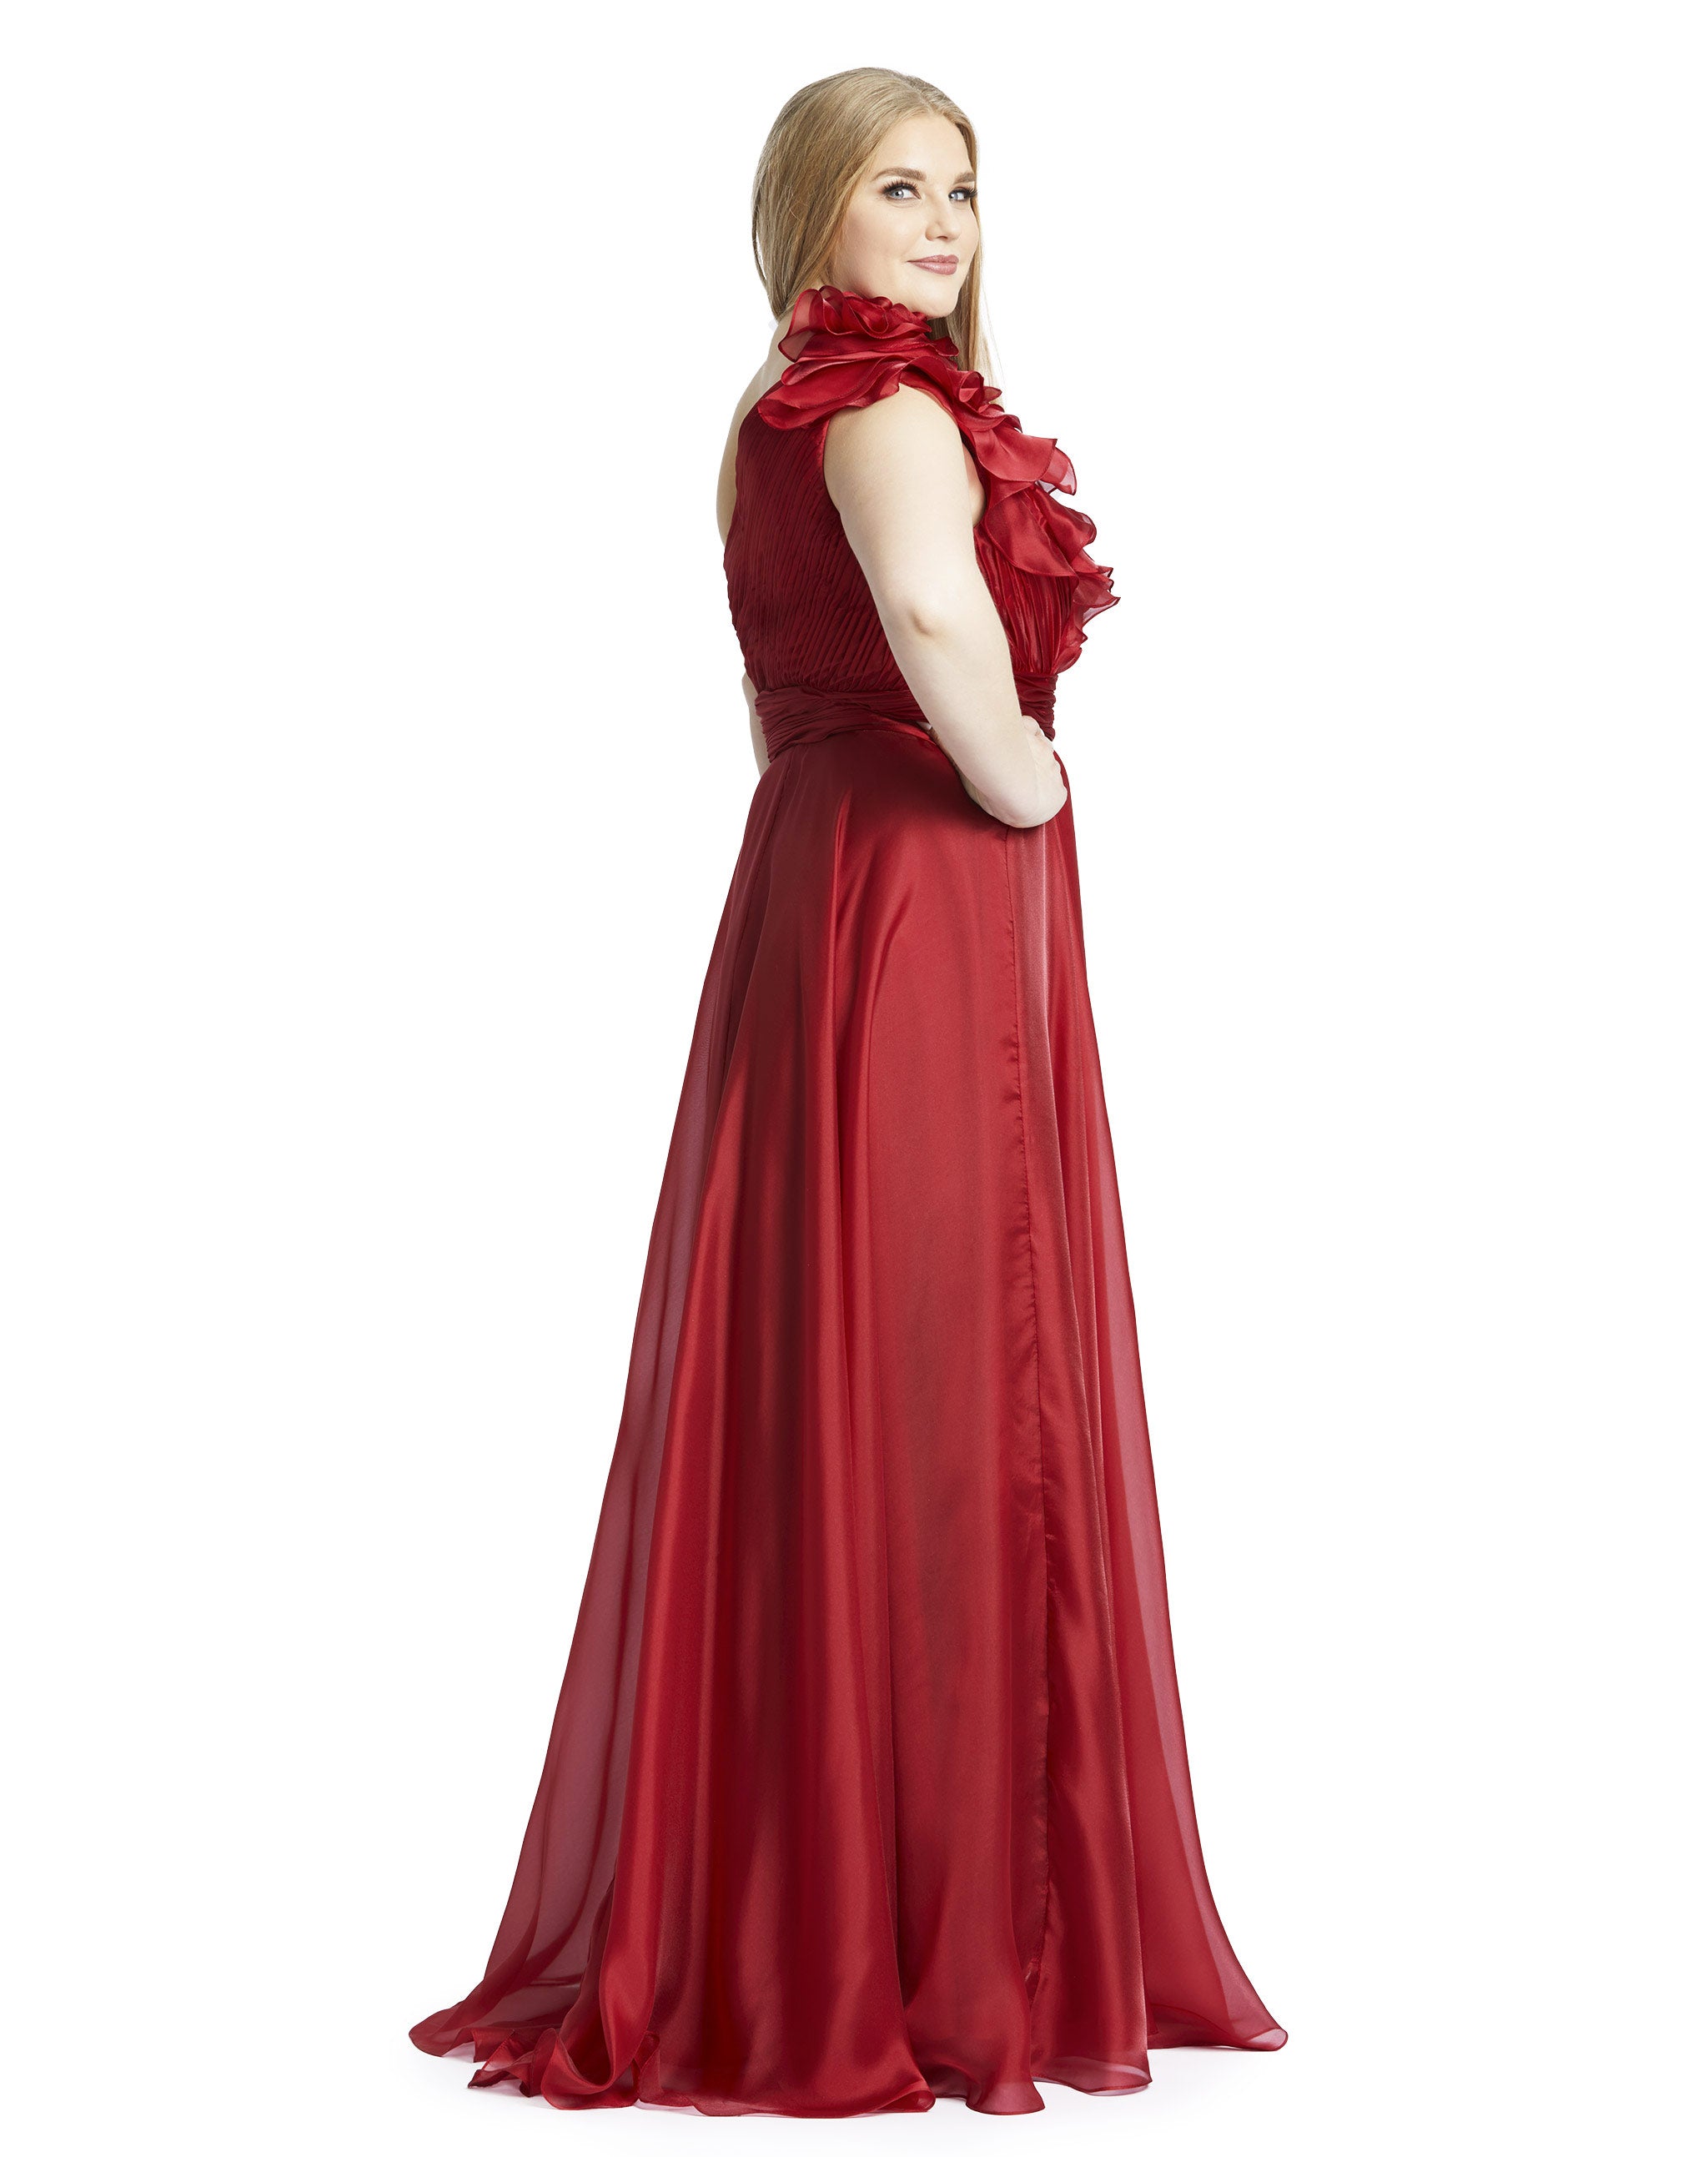 One-Shoulder Ruffle Evening Gown (Plus)